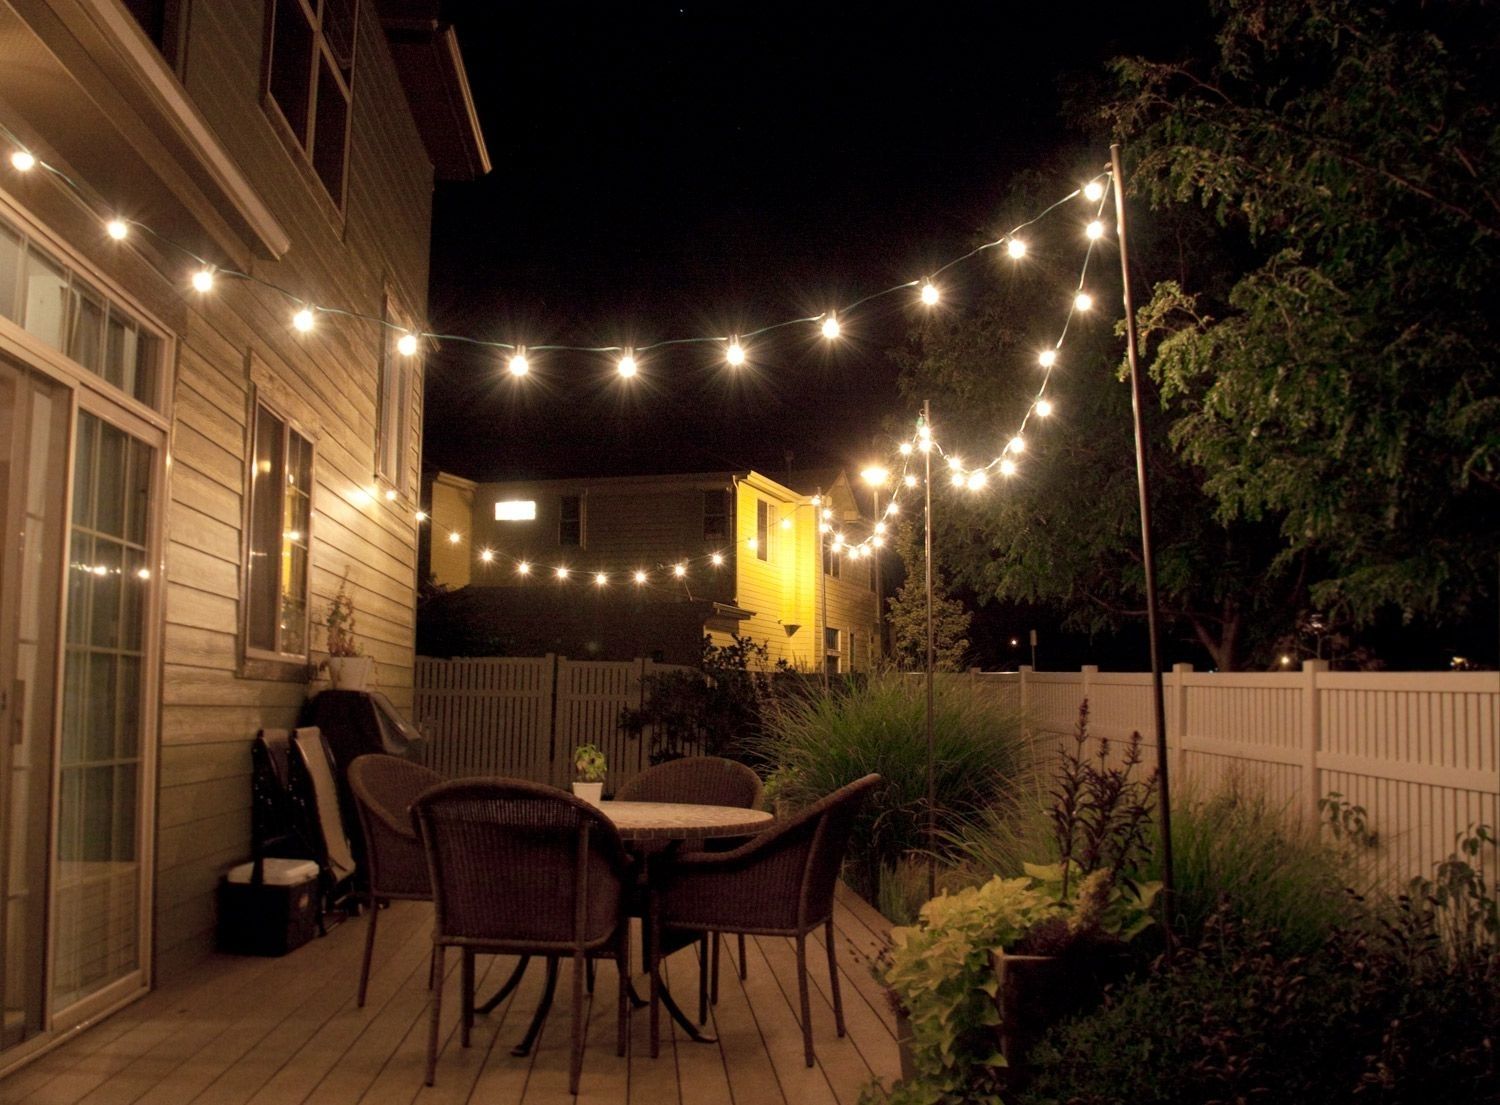 How To Make Inexpensive Poles To Hang String Lights On – Café Style In Outdoor String Lanterns (Photo 1 of 20)